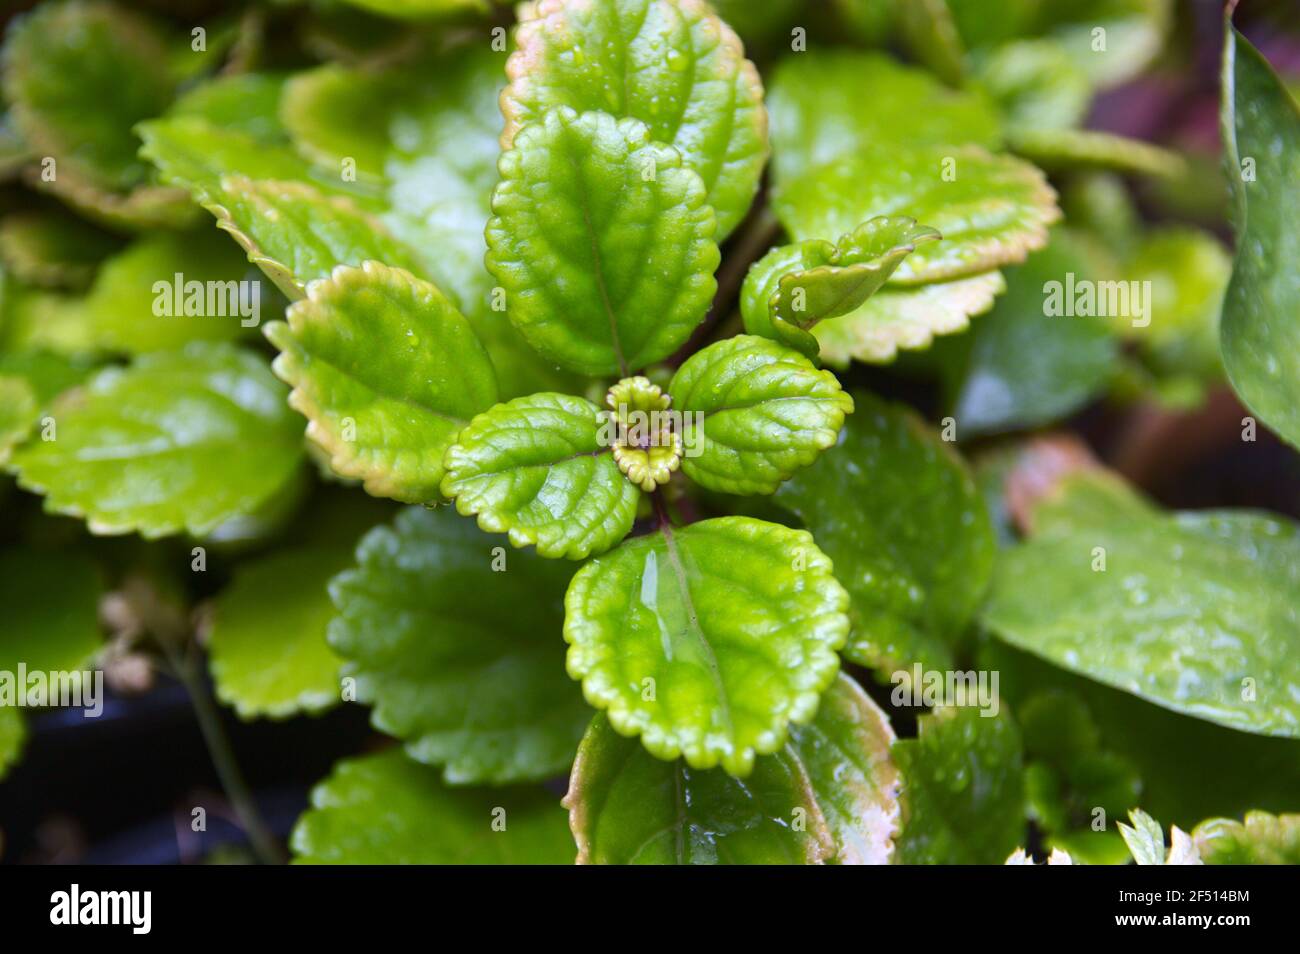 Closeup of the leaves of a money plant known as plectranthus verticillatus Stock Photo